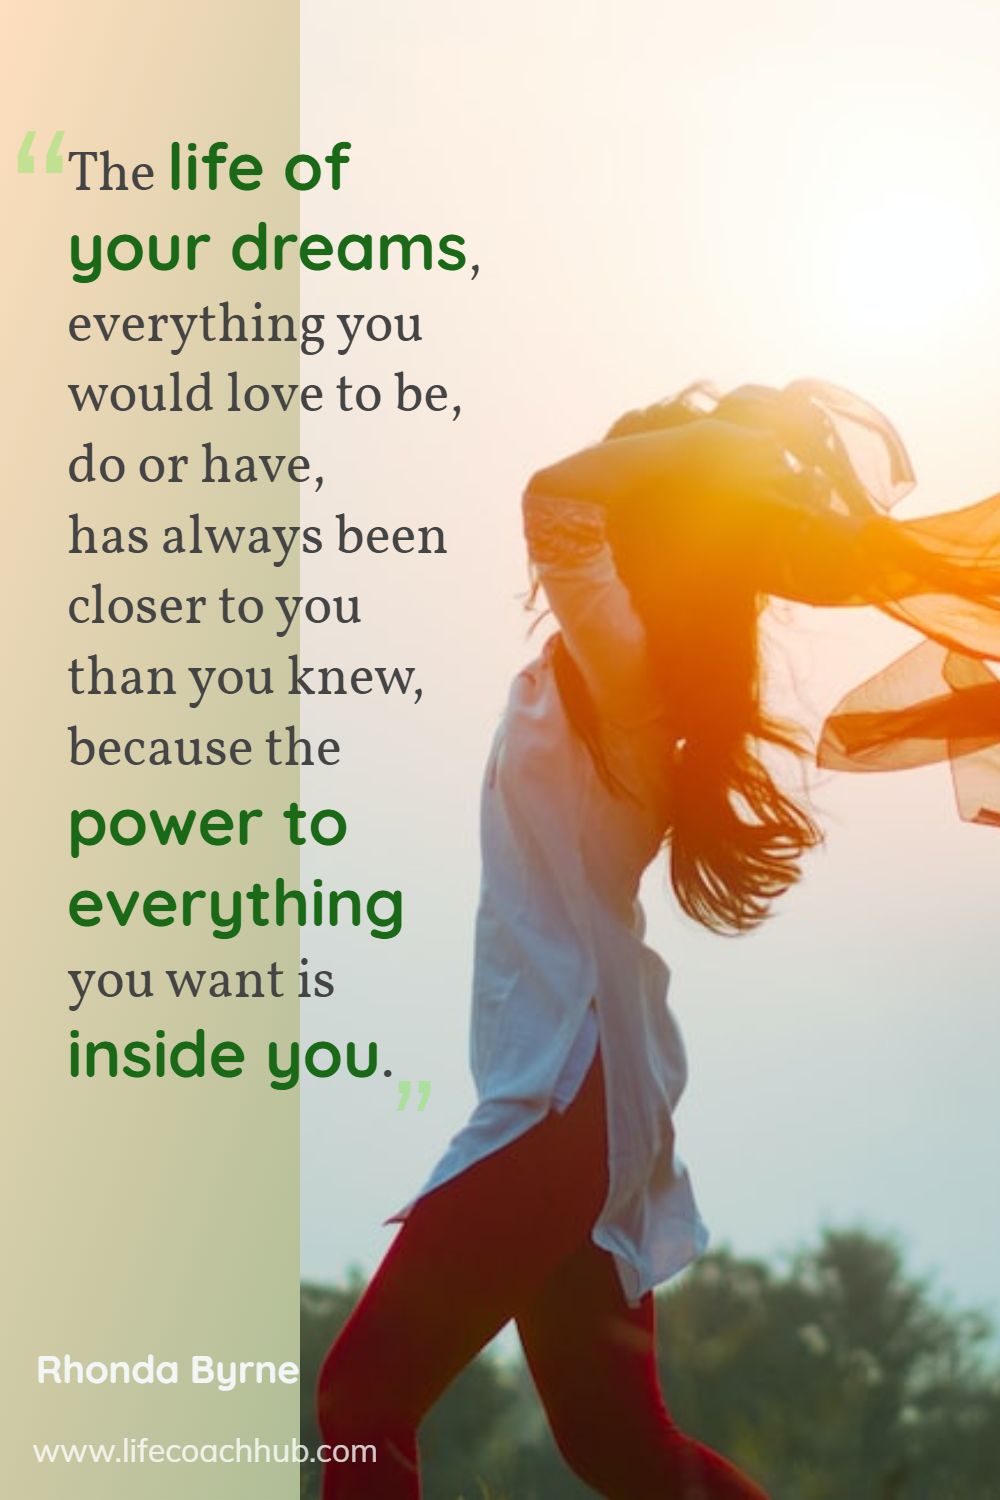 The life of your dreams, everything you would love to be, do or have, has always been closer to you than you knew, because the power to everything you want is inside you. Rhonda Byrne Coaching Quote